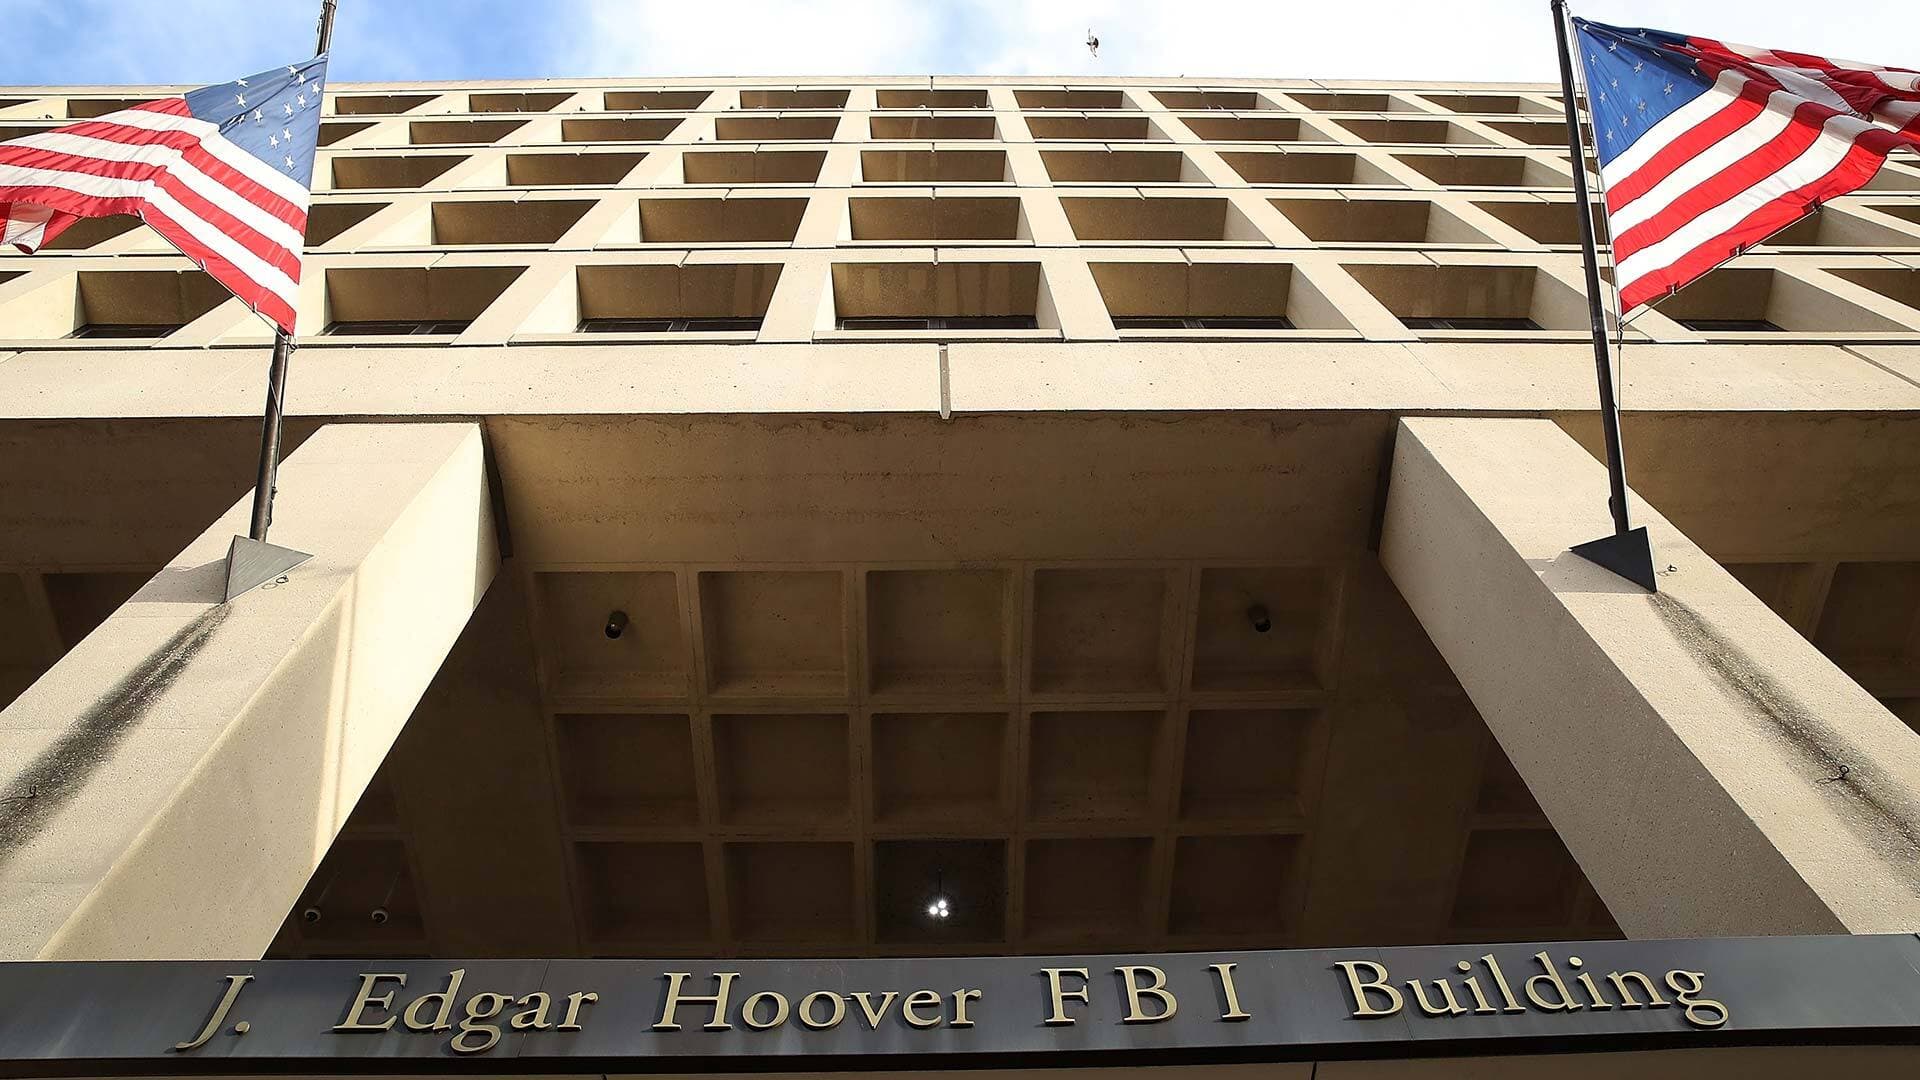 The J. Edgar Hoover FBI Building with American flags flying